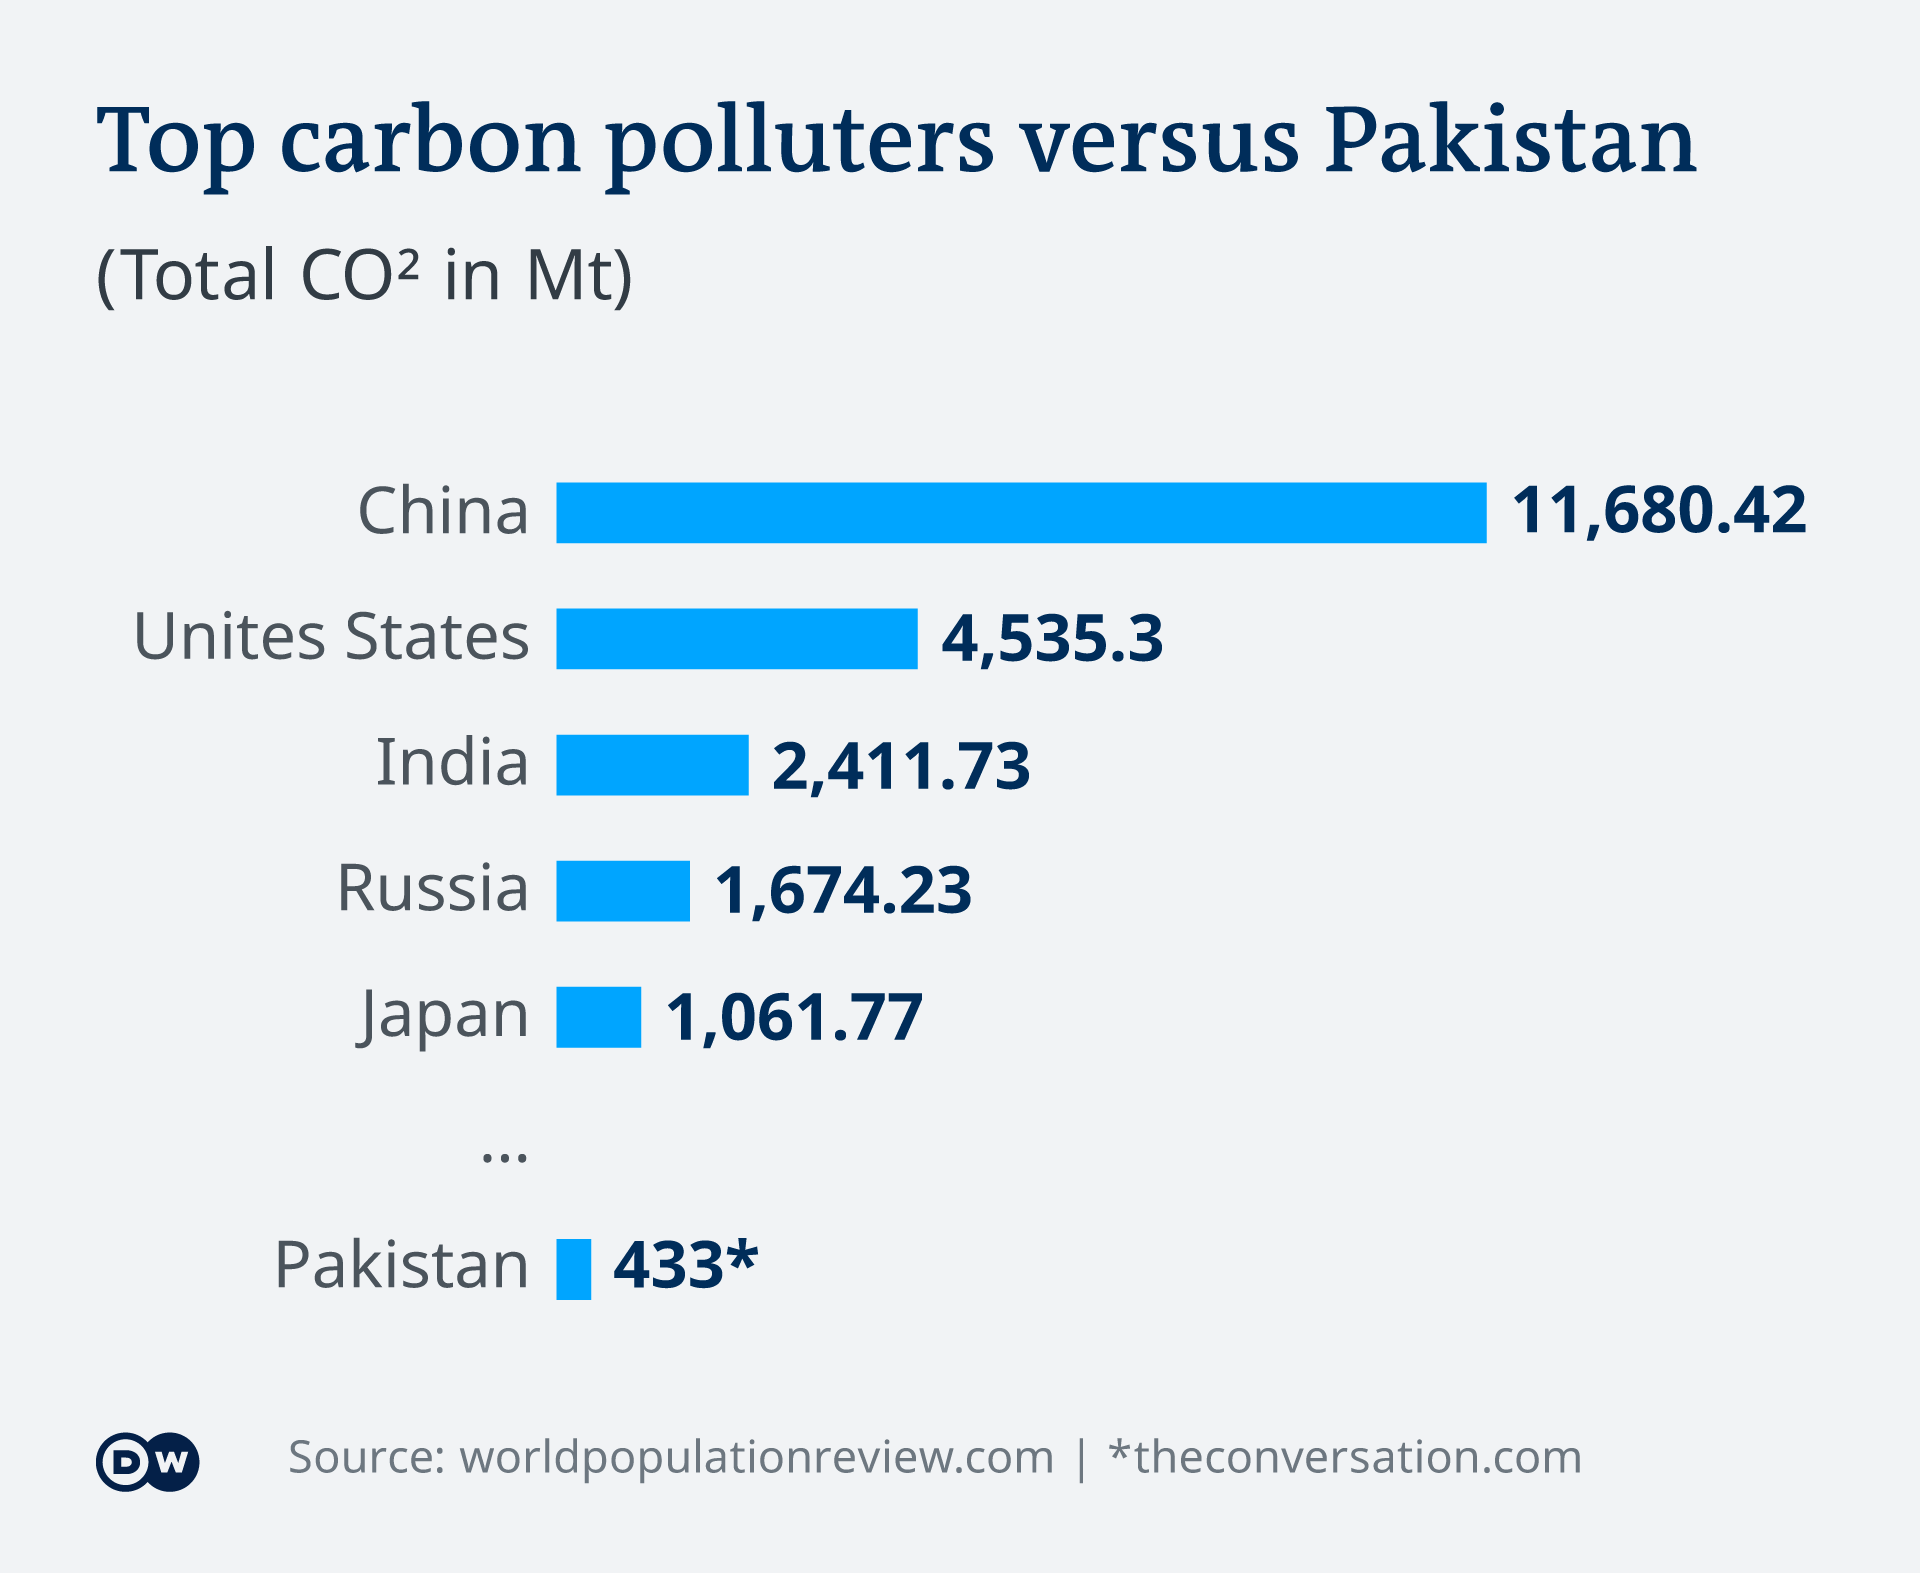 Top carbon polluters versus Pakistan, as shown in a graphic